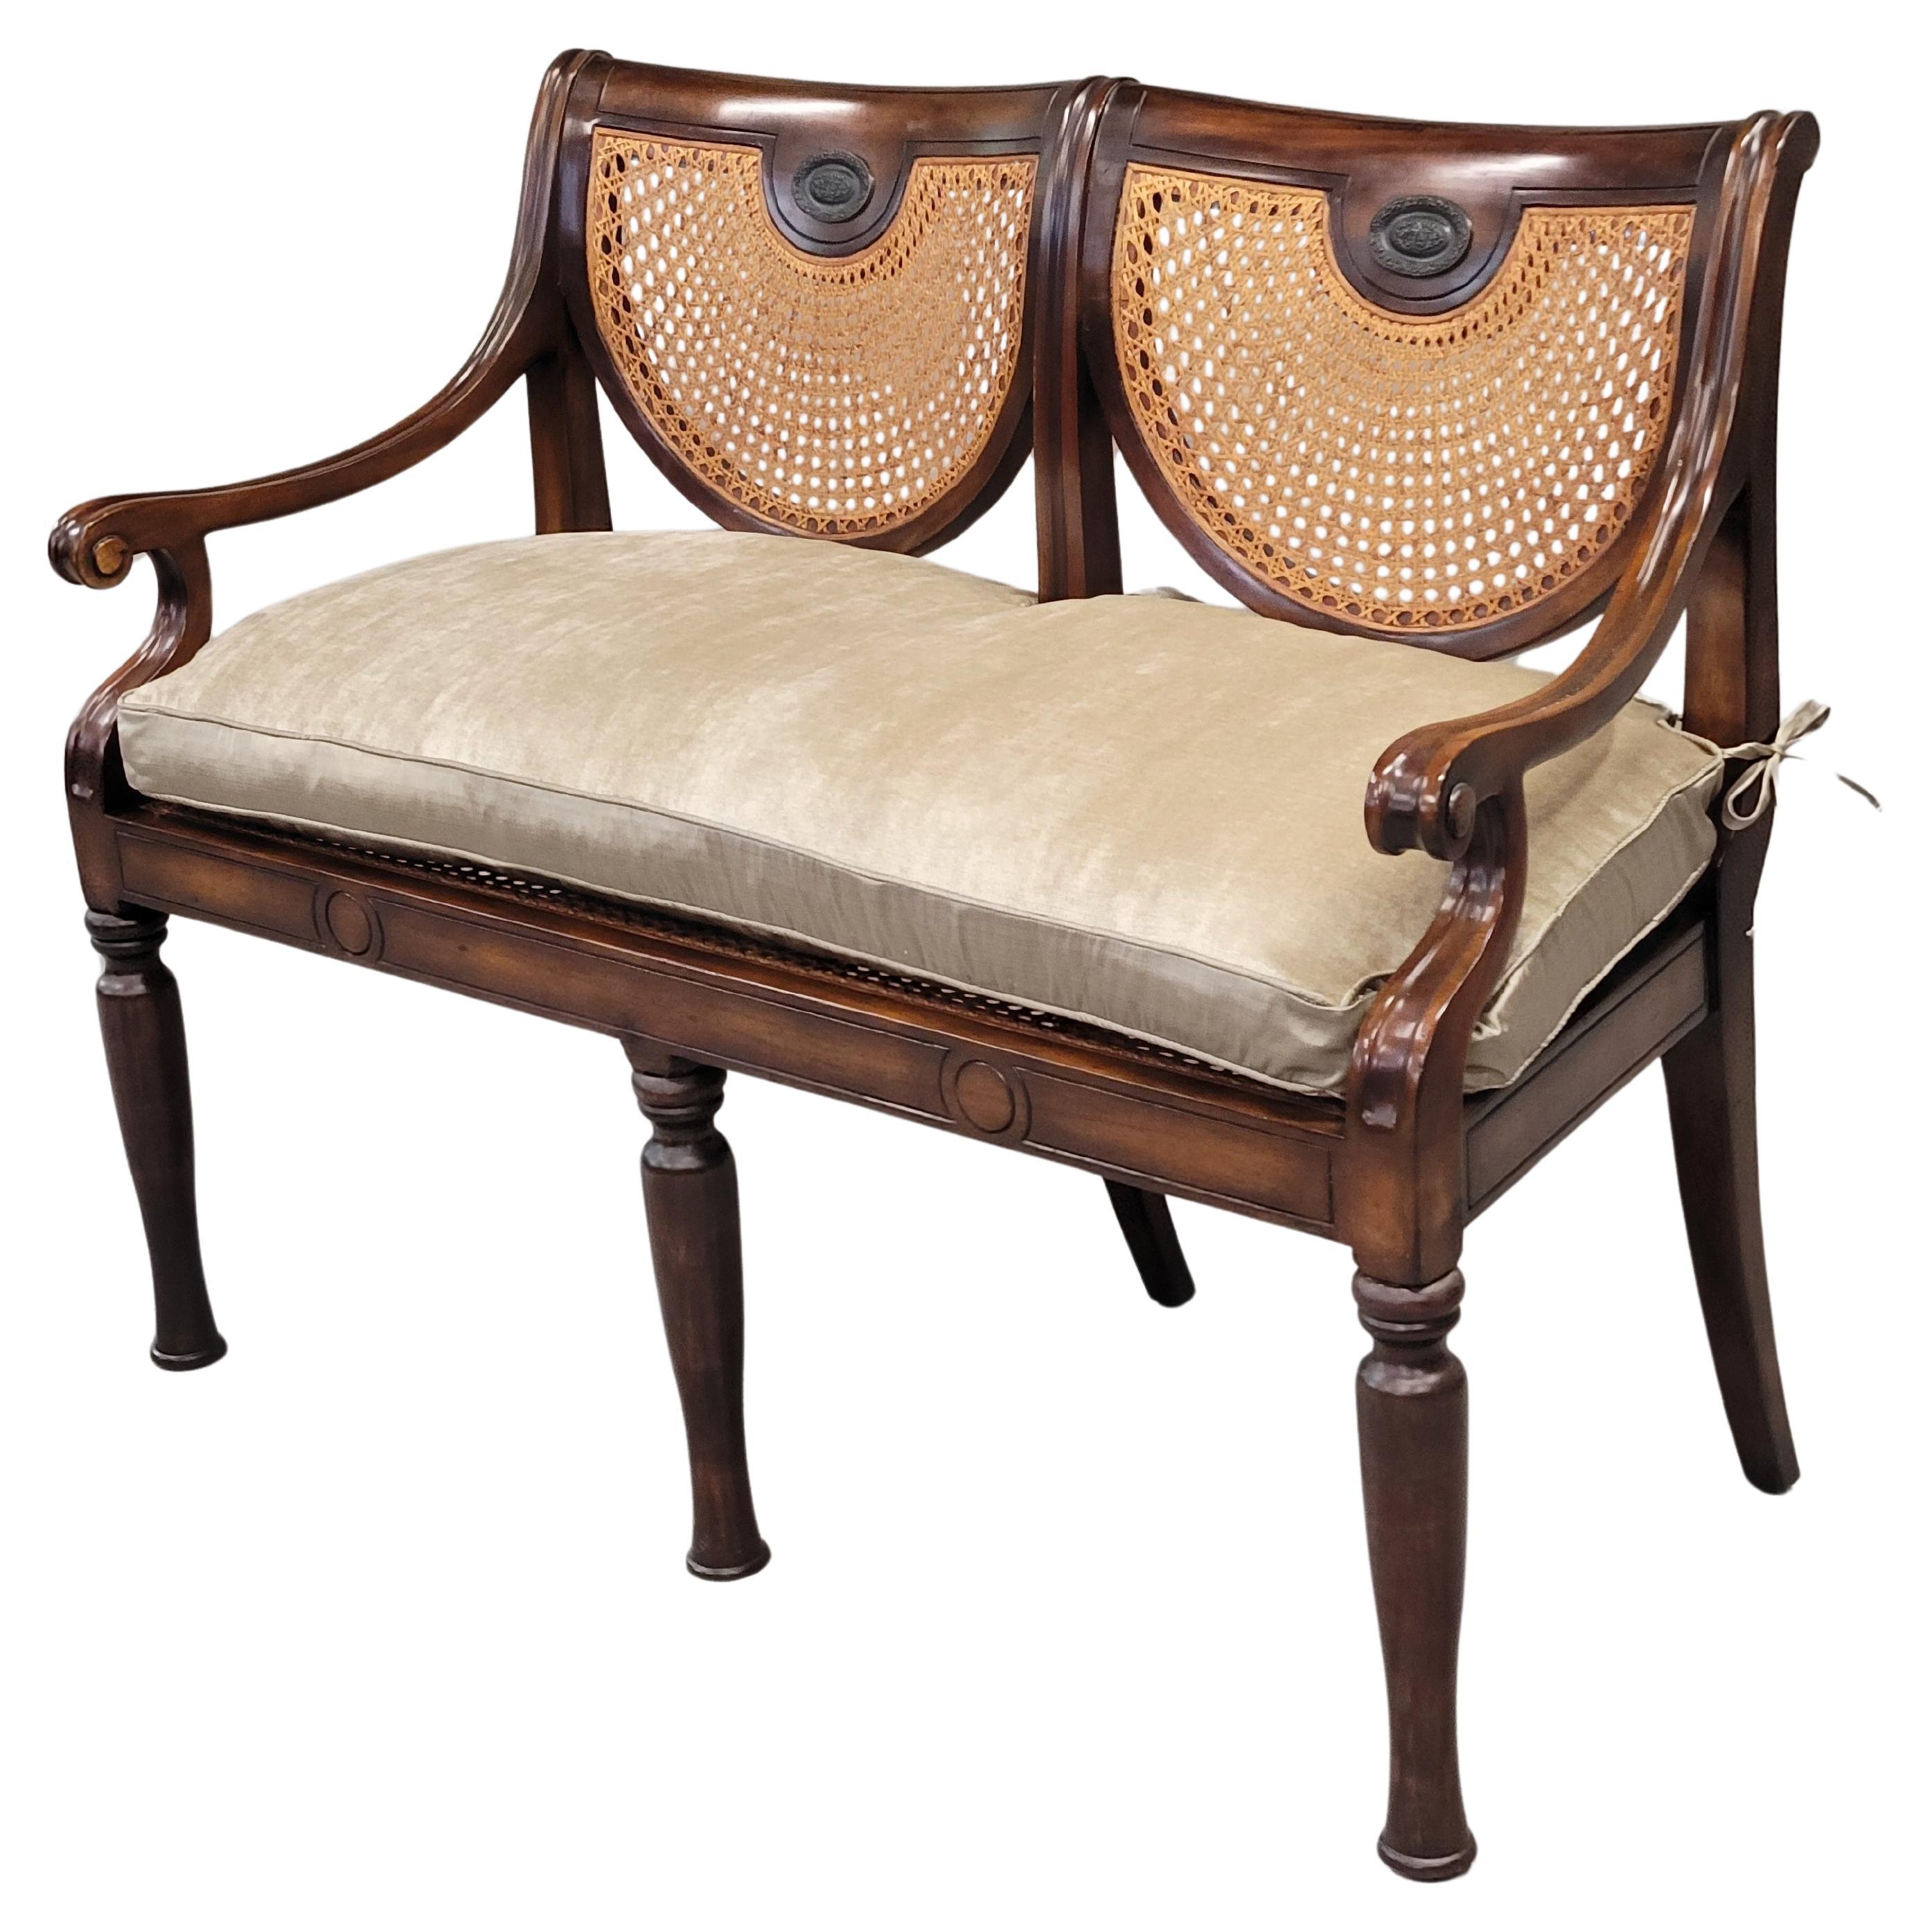 Vintage Theodore Alexander Regency Caned Mahogany Settee With Down Cushion For Sale